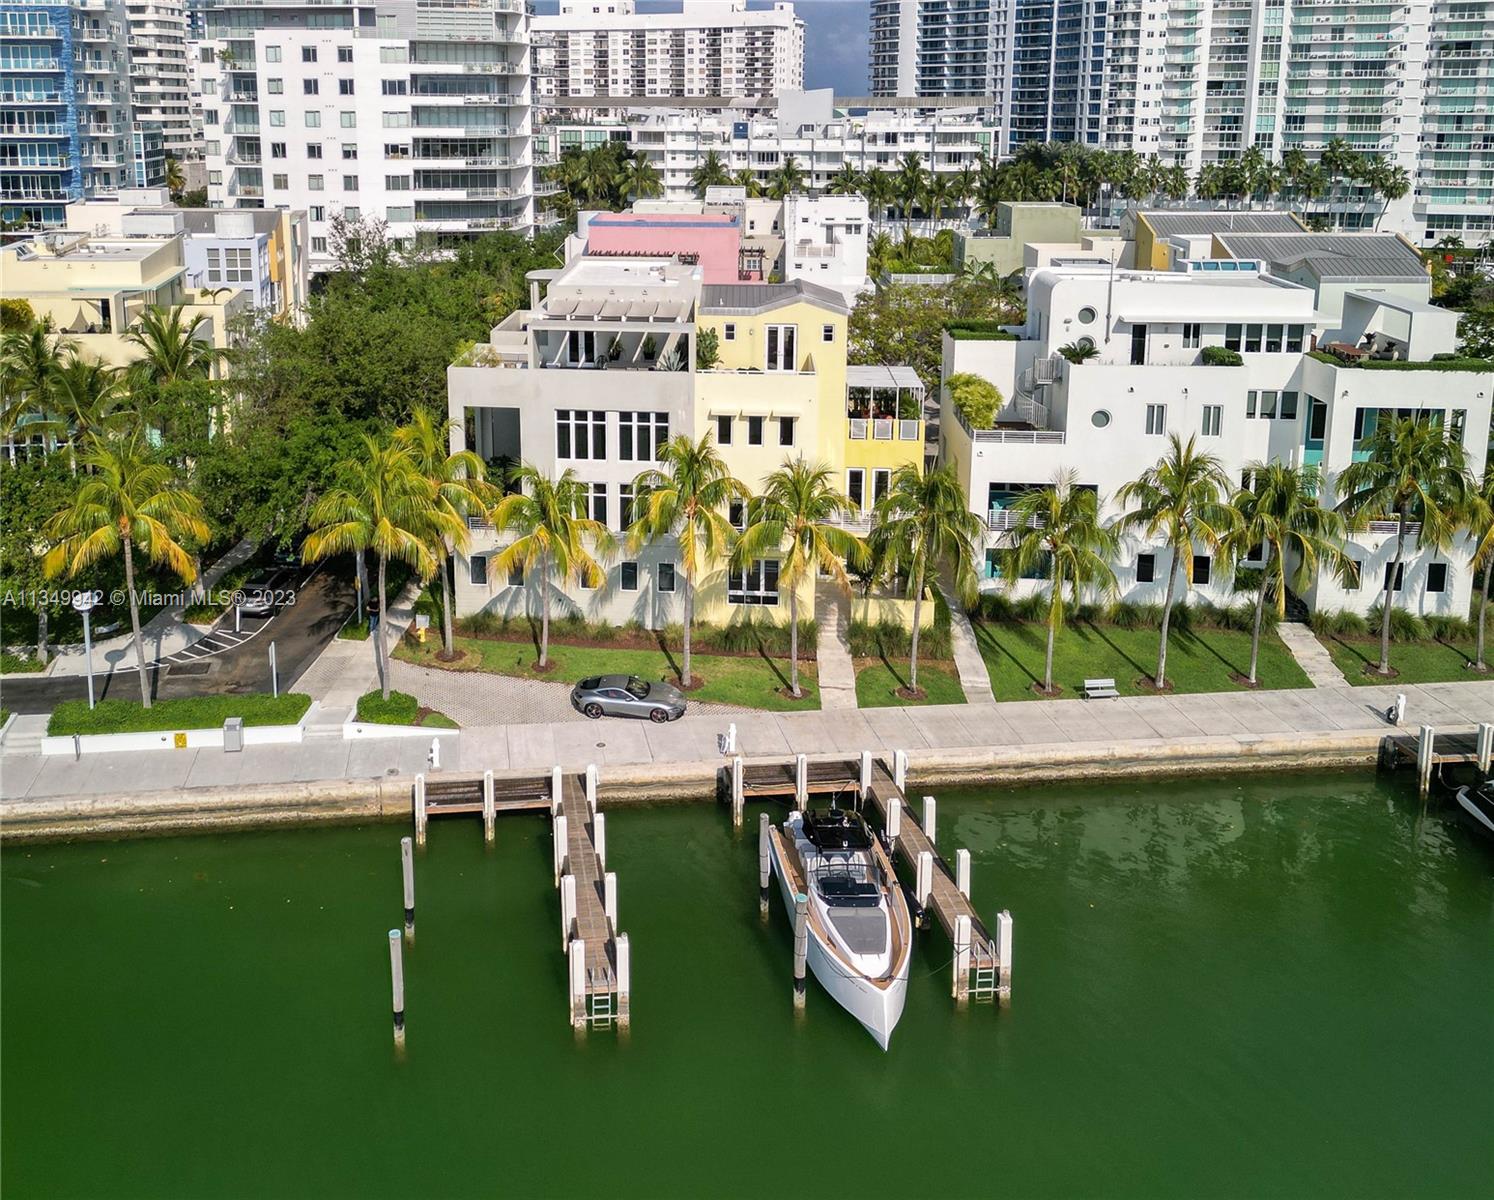 This amazing 4 story waterfront home is being offered with all the amenities you could wish for!   Water views and expansive terraces at every level to enjoy mesmerizing sunsets and or your atrium garden center. This 5,298 SF re-designed home offers 5 bedrooms and 5 en-suite bathrooms,  Poggenpohl kitchen with gas range any chef would love, designer soffits with cove lighting and custom made Italian millwork throughout. New electrical, plumbing, and elevator. No expense spared.  The expansive beautiful master suite occupies entire 3rd floor for peaceful secluded living.    Set out in Miami from your oversized air conditioned private garage or by sea from your private deeded dock in the front of your new home . Sunny Florida awaits!